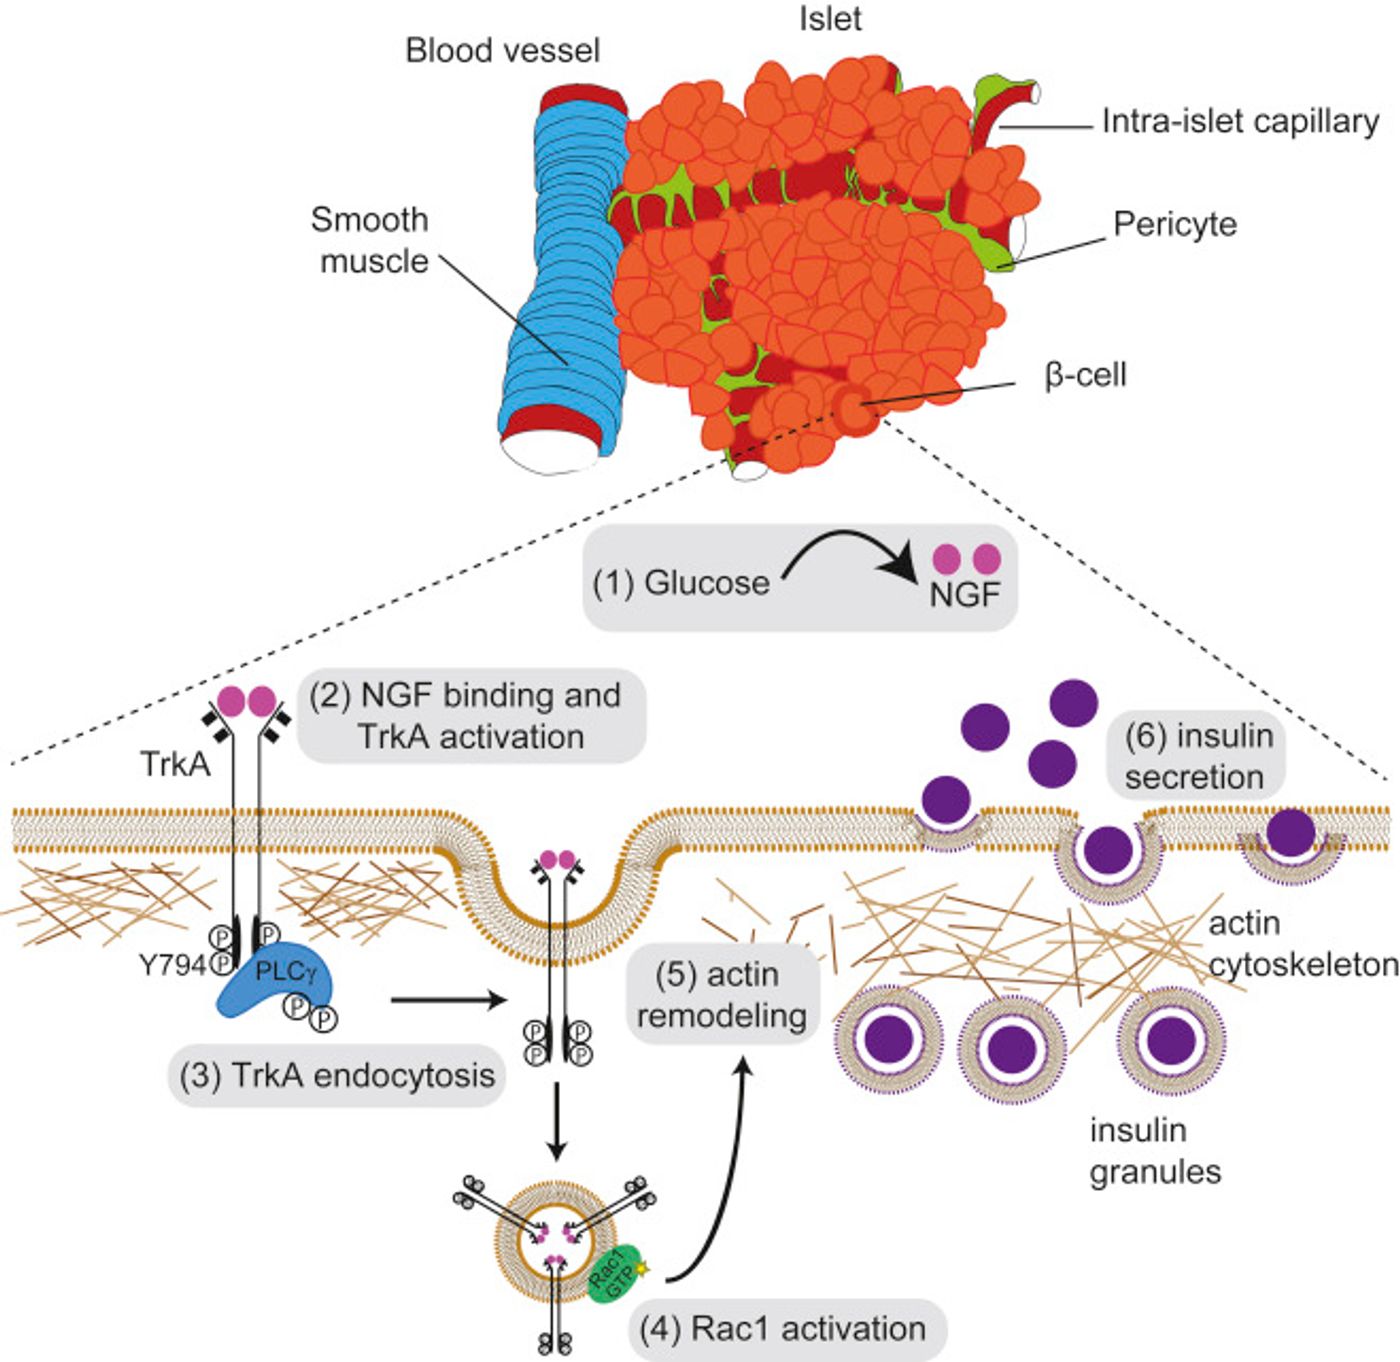 (1) NGF is secreted by pancreatic VSMCs and intra-islet pericytes in response to elevated glucose. (2) Vascular-derived NGF activates TrkA receptors on islet ? cells. (3) TrkA phosphorylation leads to association & activation of the downstream effector, PLC?, which triggers receptor internalization. (4) Endosomal signaling from internalized TrkA receptors recruits & activates the actin-modulatory protein Rac1, to (5) remodel a peripheral F-actin barrier & (6) promote insulin granule exocytosis./Credit: Dev Cell Houtz et al